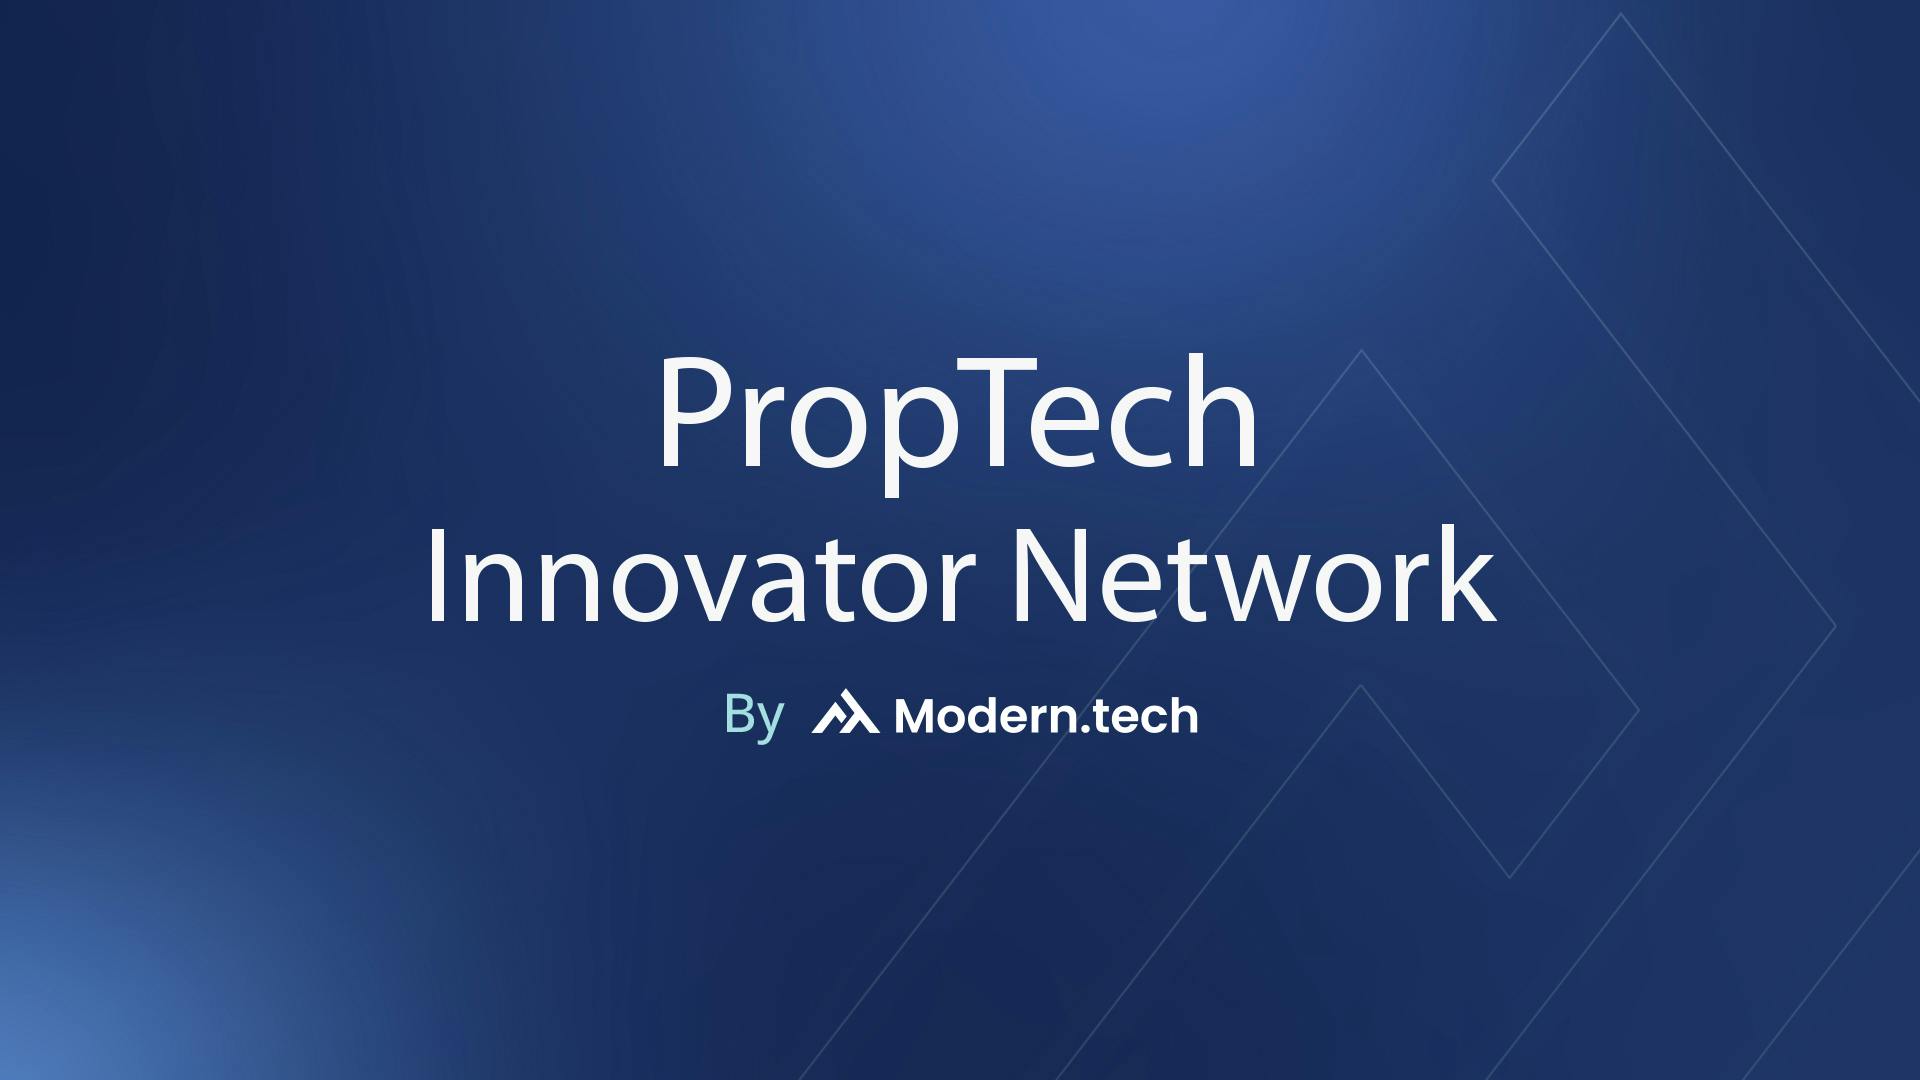 Modern.tech Launches the PropTech Innovator Network2